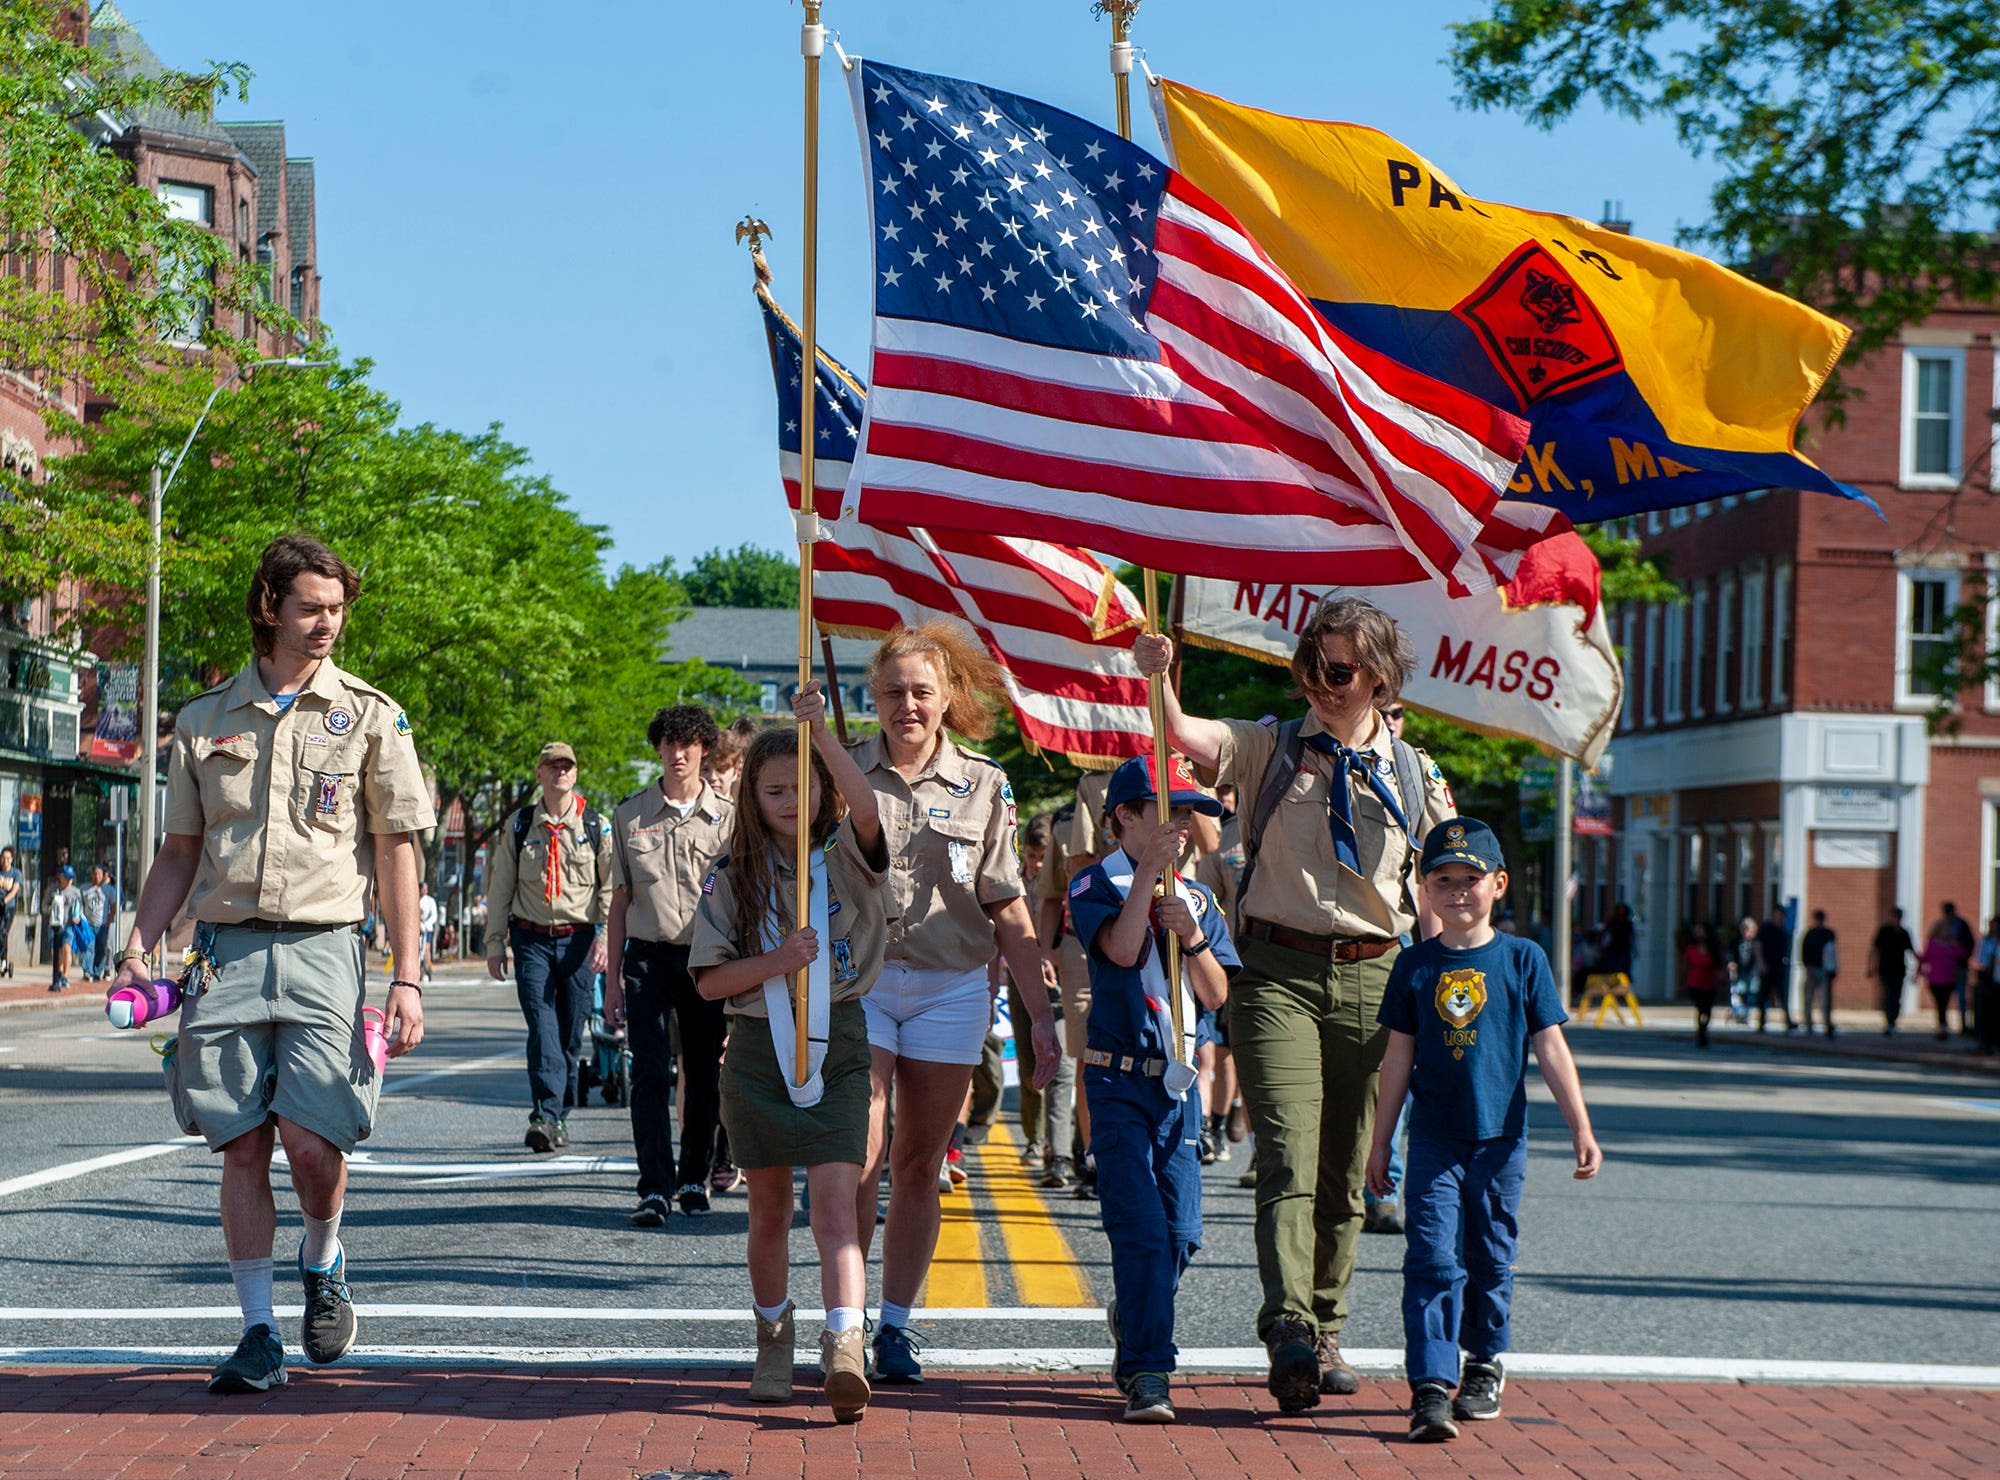 Six MetroWest communities that have a full plate of events planned for Memorial Day